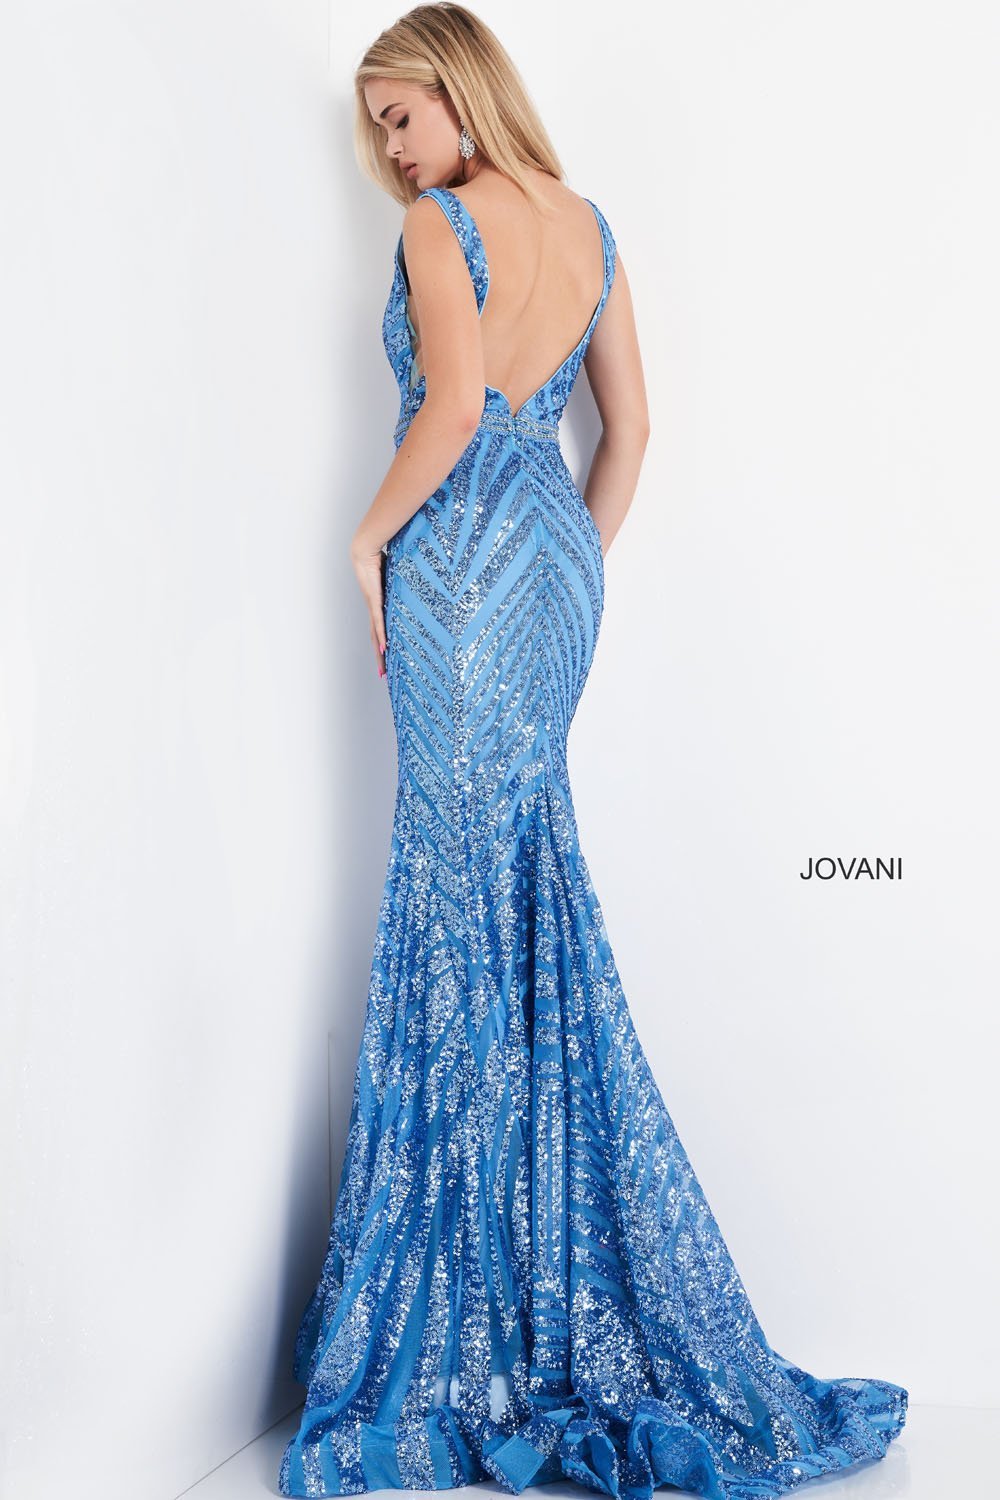 Jovani 03570 dress images in these colors: Black Nude, Light Blue, Red, Rose Gold, Yellow.